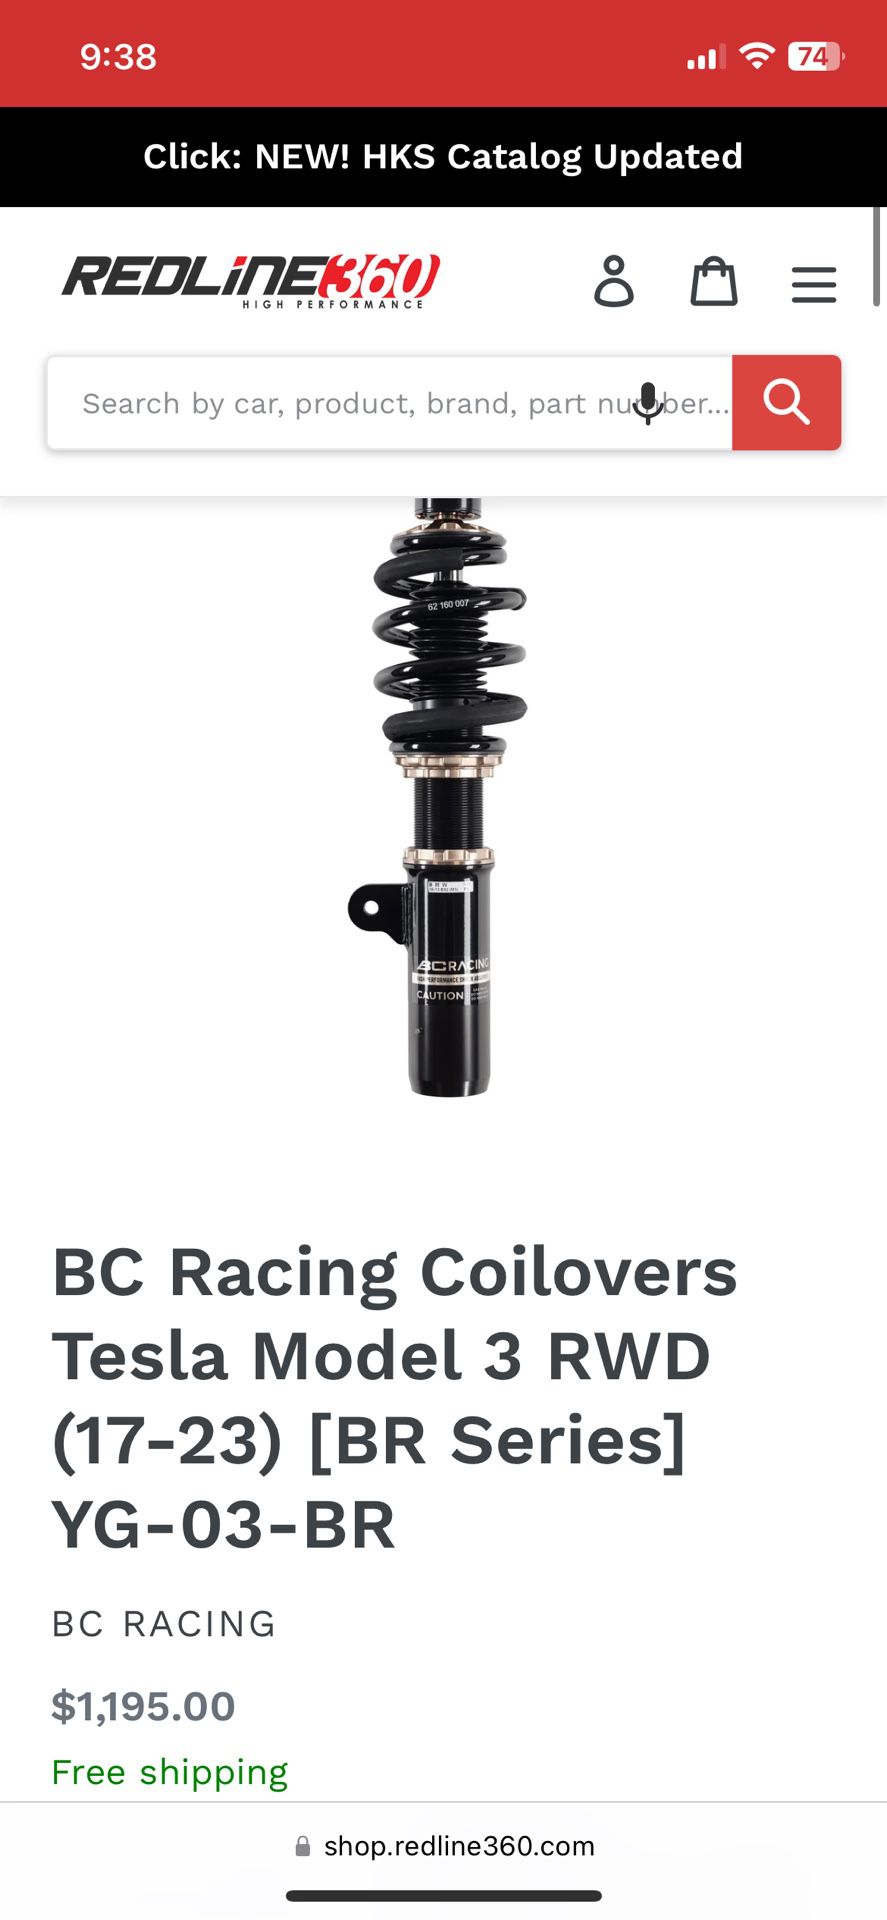 Unopened Box BC Racing Coilovers Tesla Model 3 RWD (17-23) [BR Series] YG-03-BR